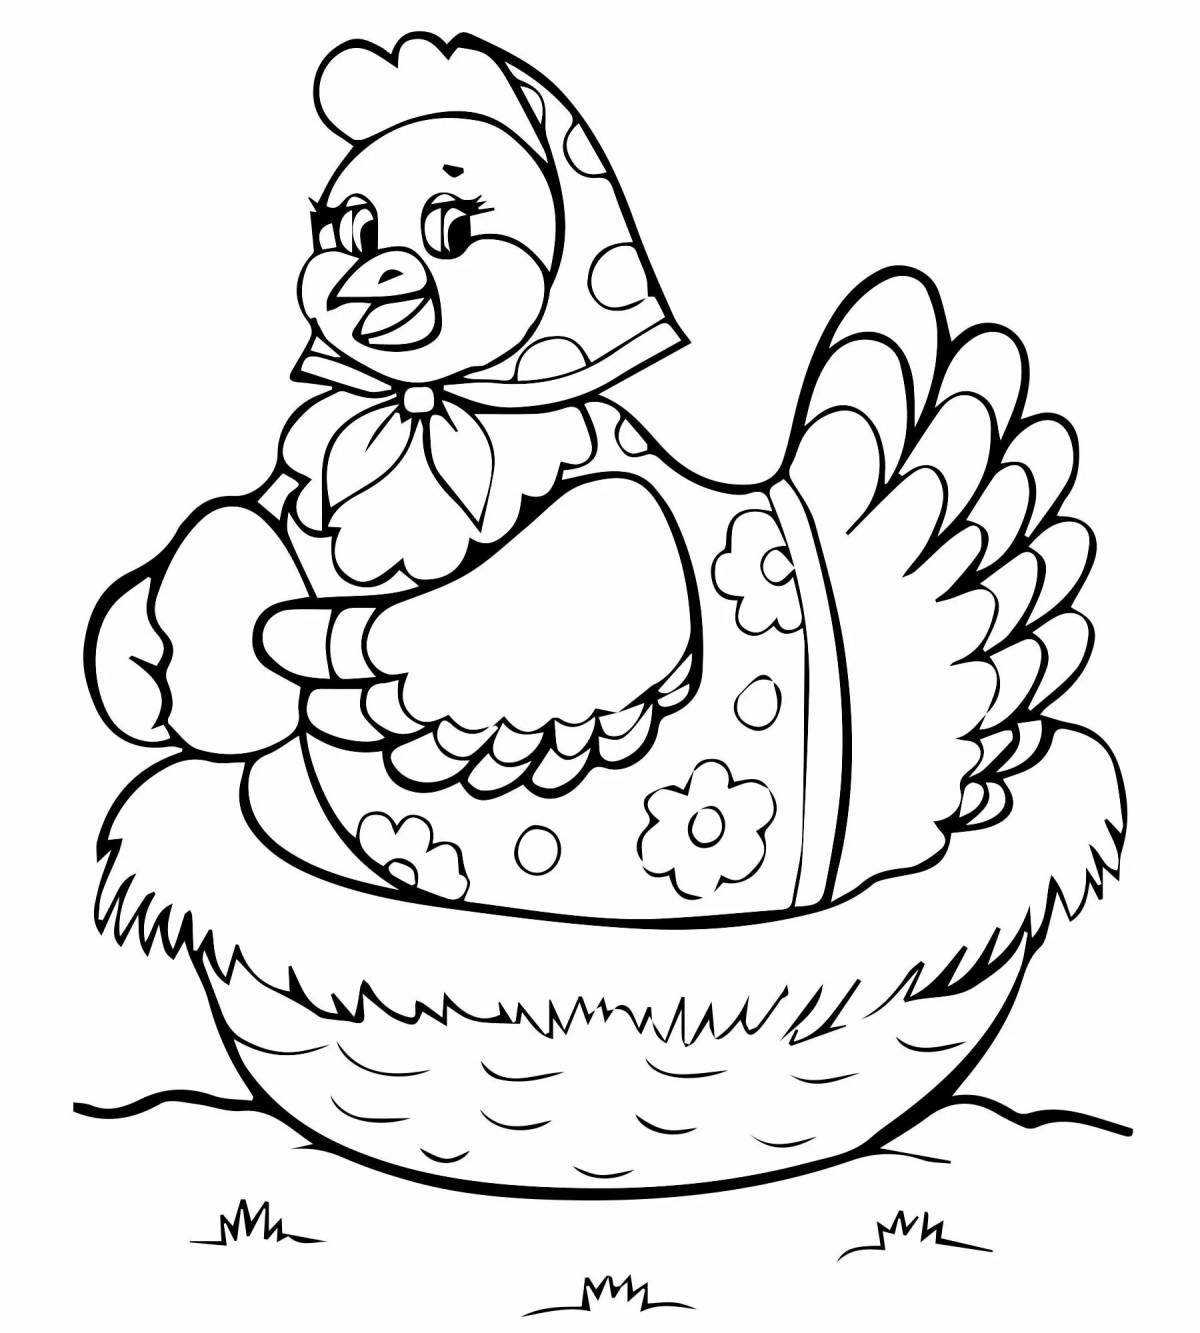 Inspirational fairy tale coloring pages